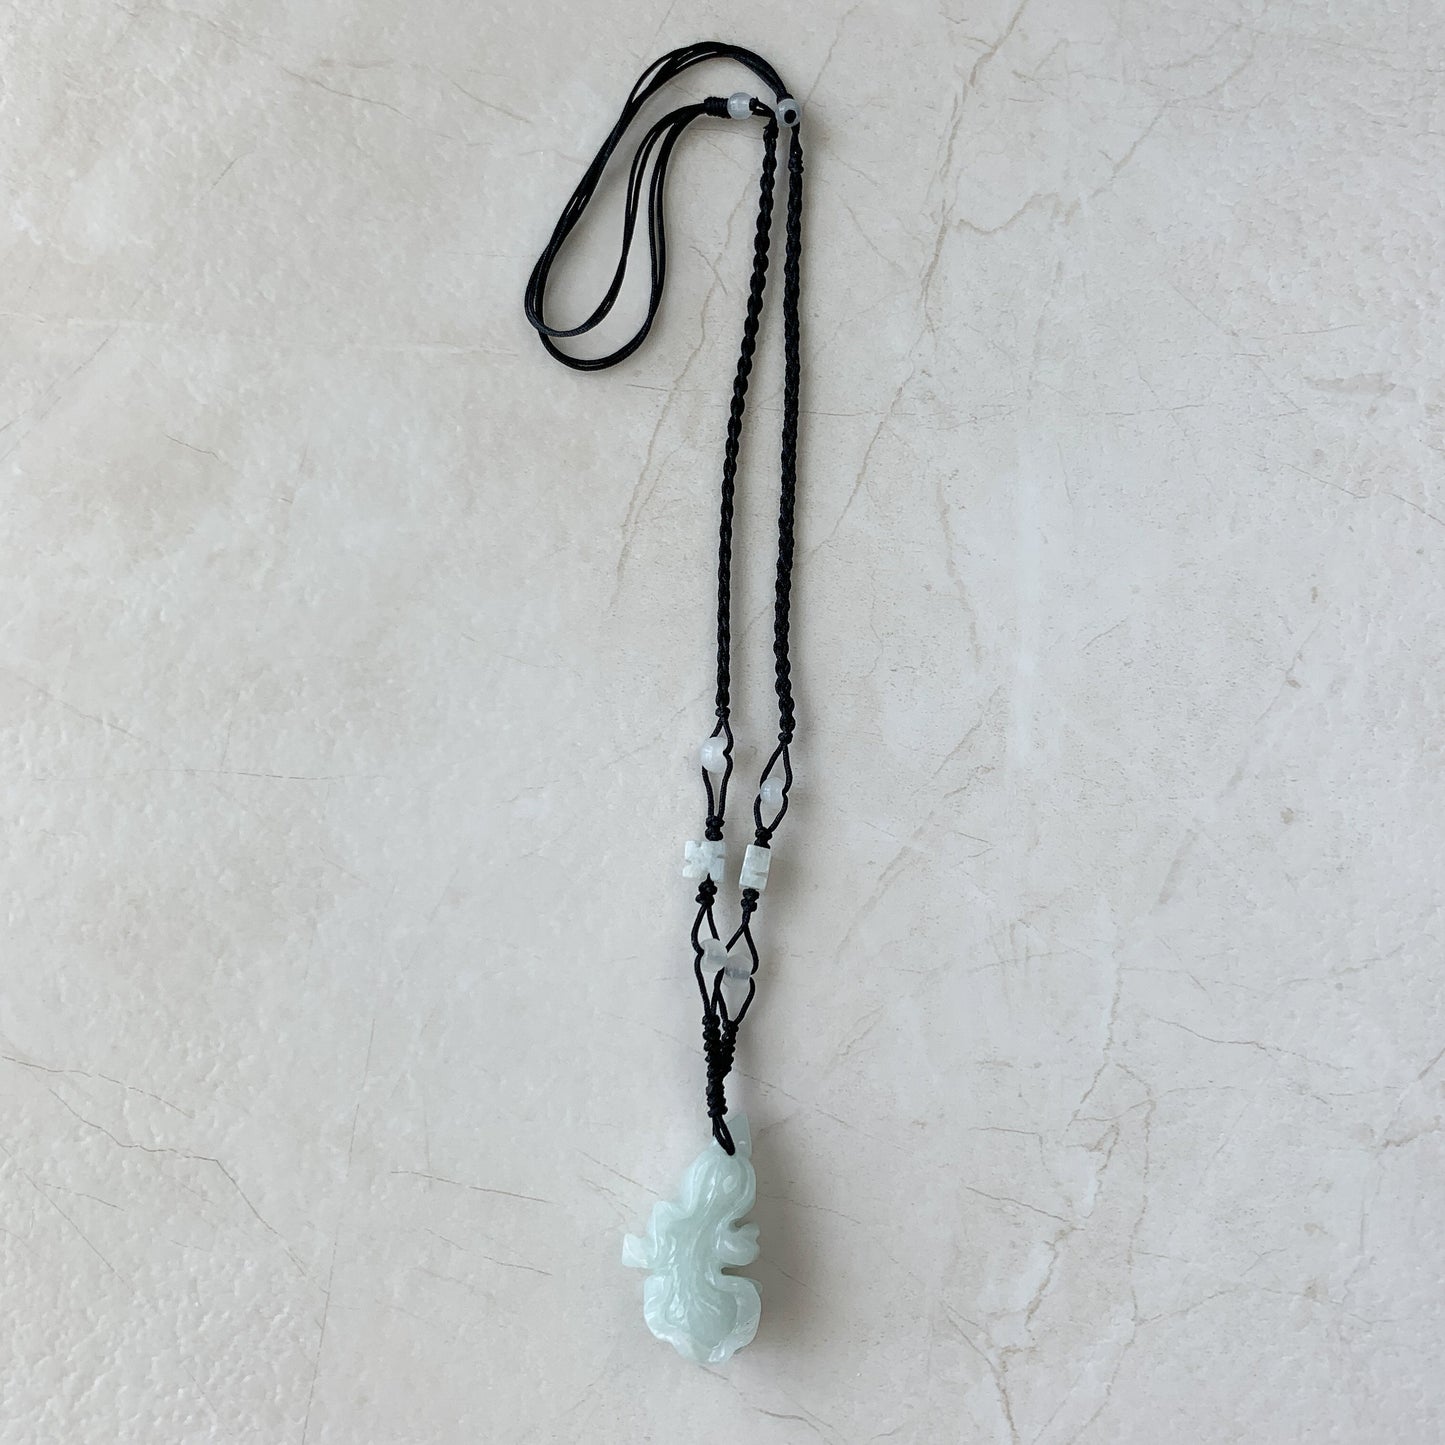 Jadeite Jade Cabbage Wealth and Prosperity Necklace, YW-0110-1646516034 - AriaDesignCollection